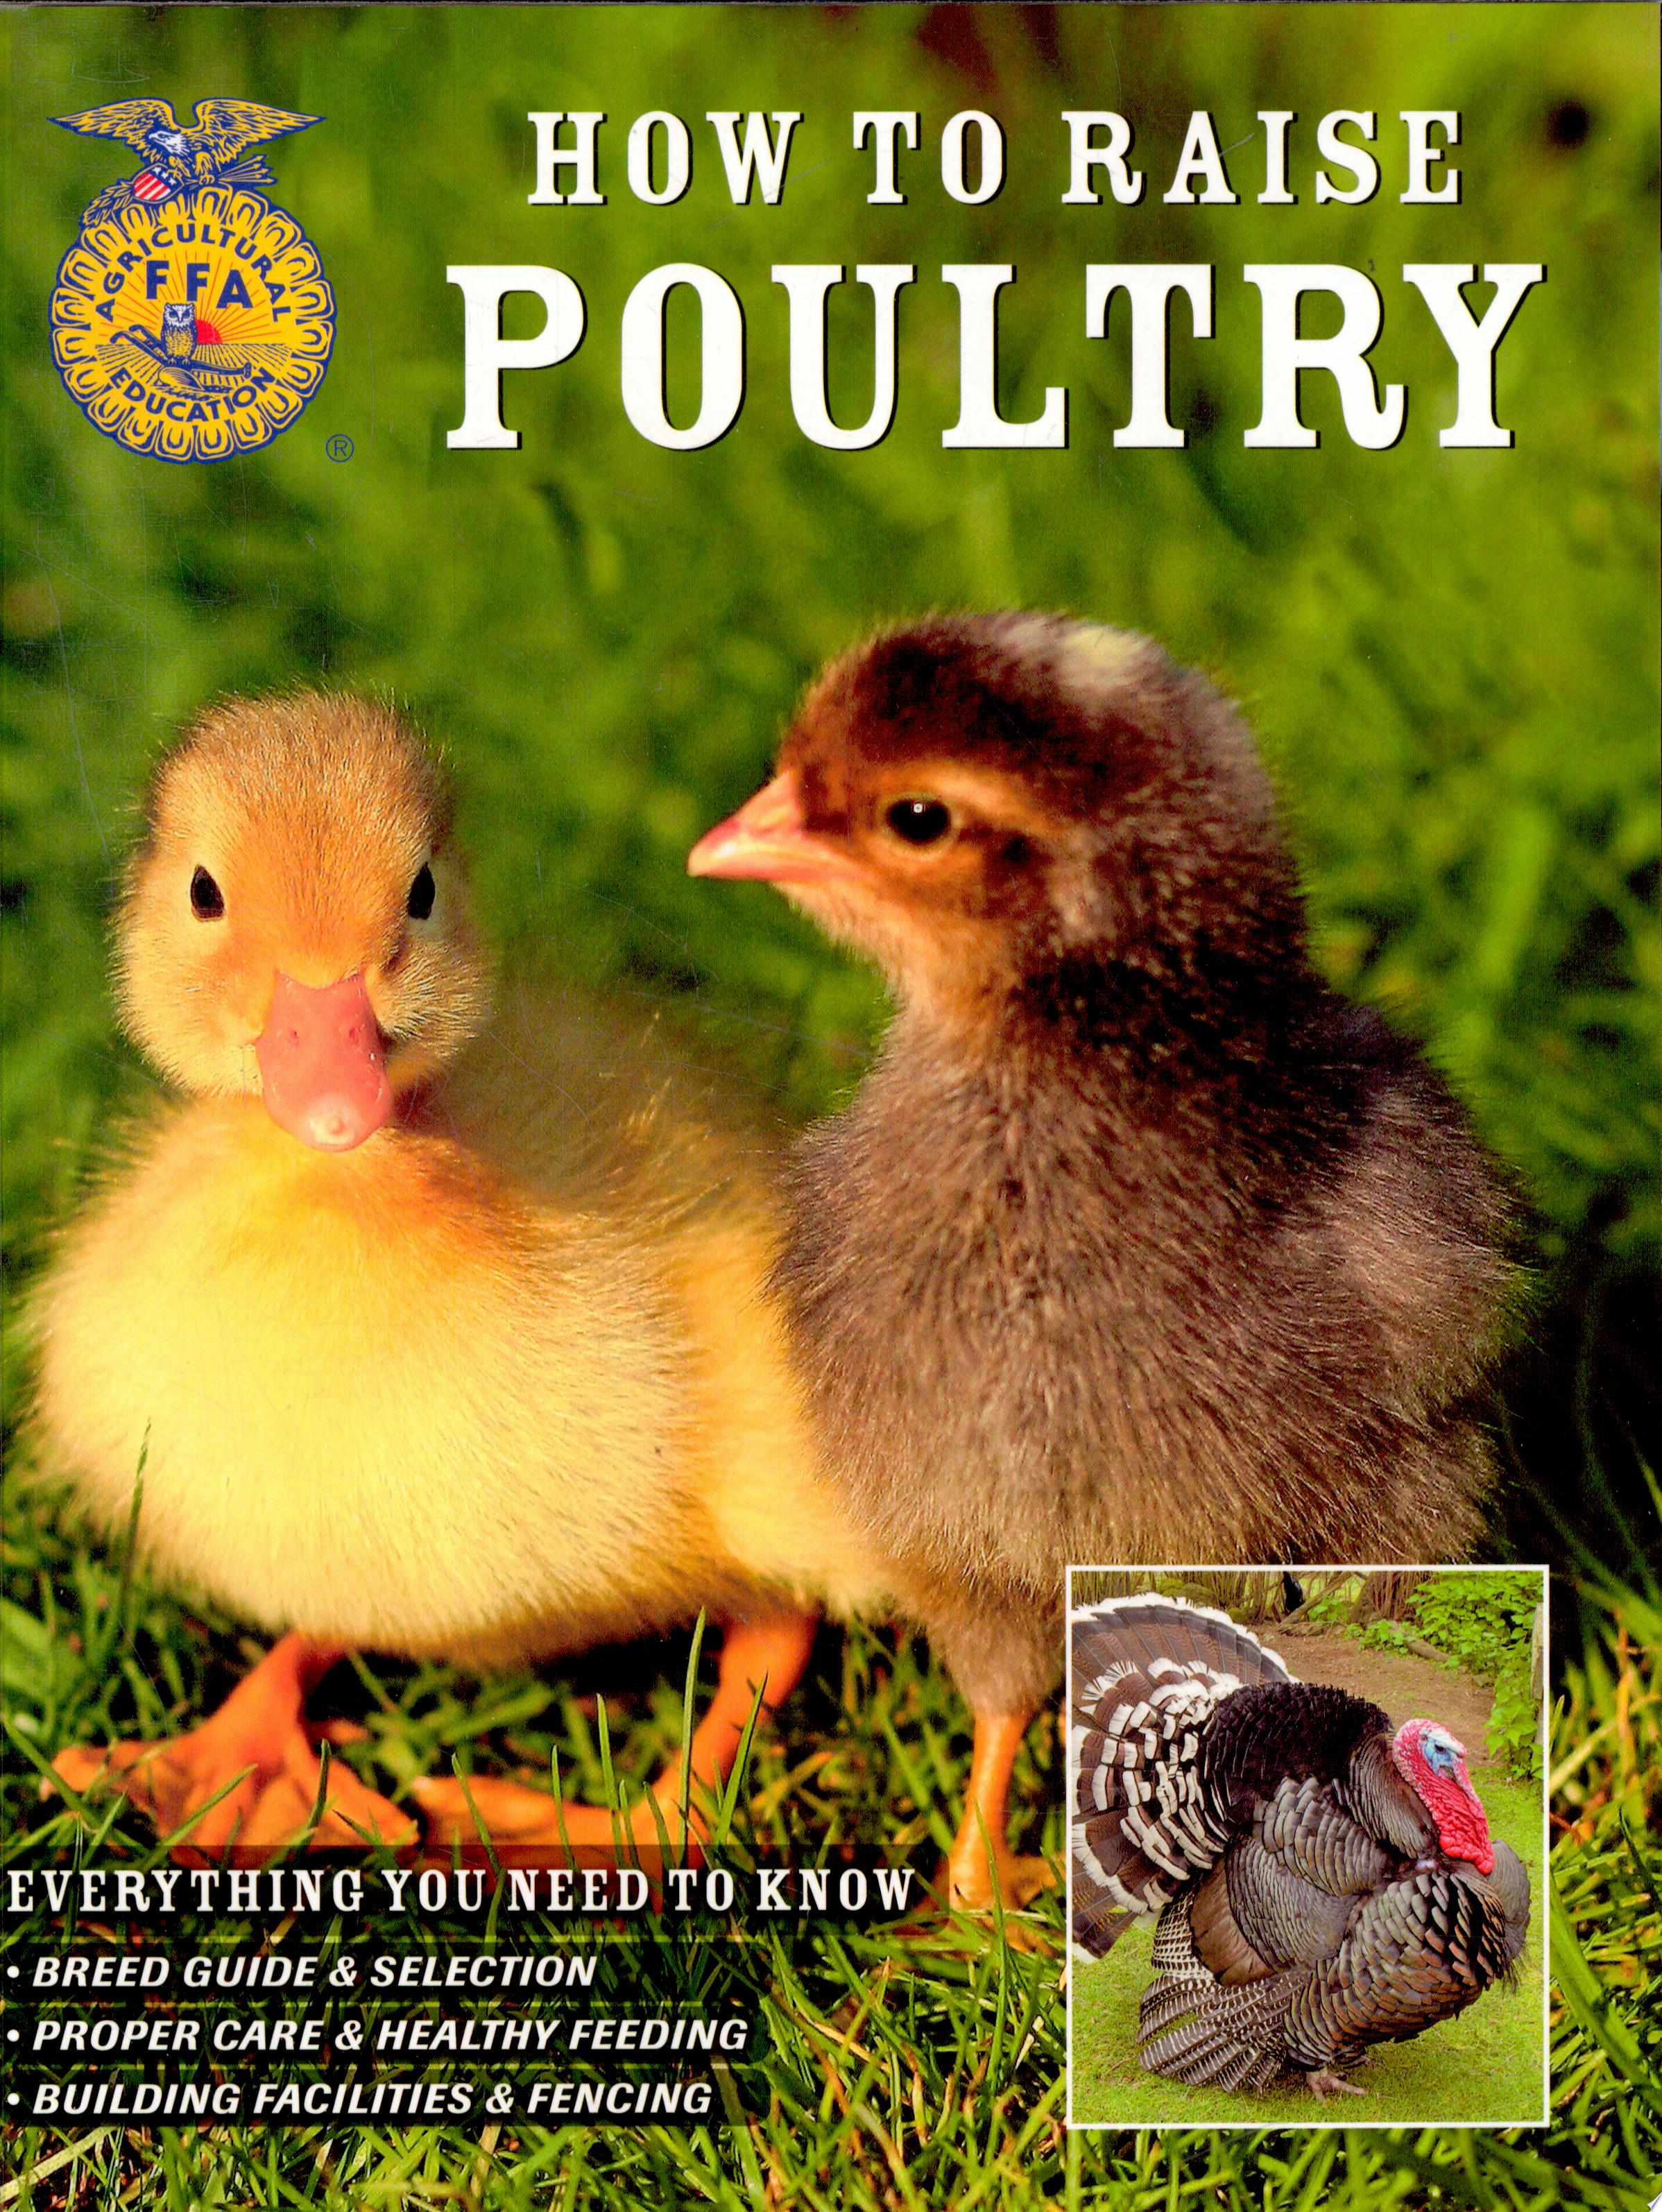 Image for "How to Raise Poultry"